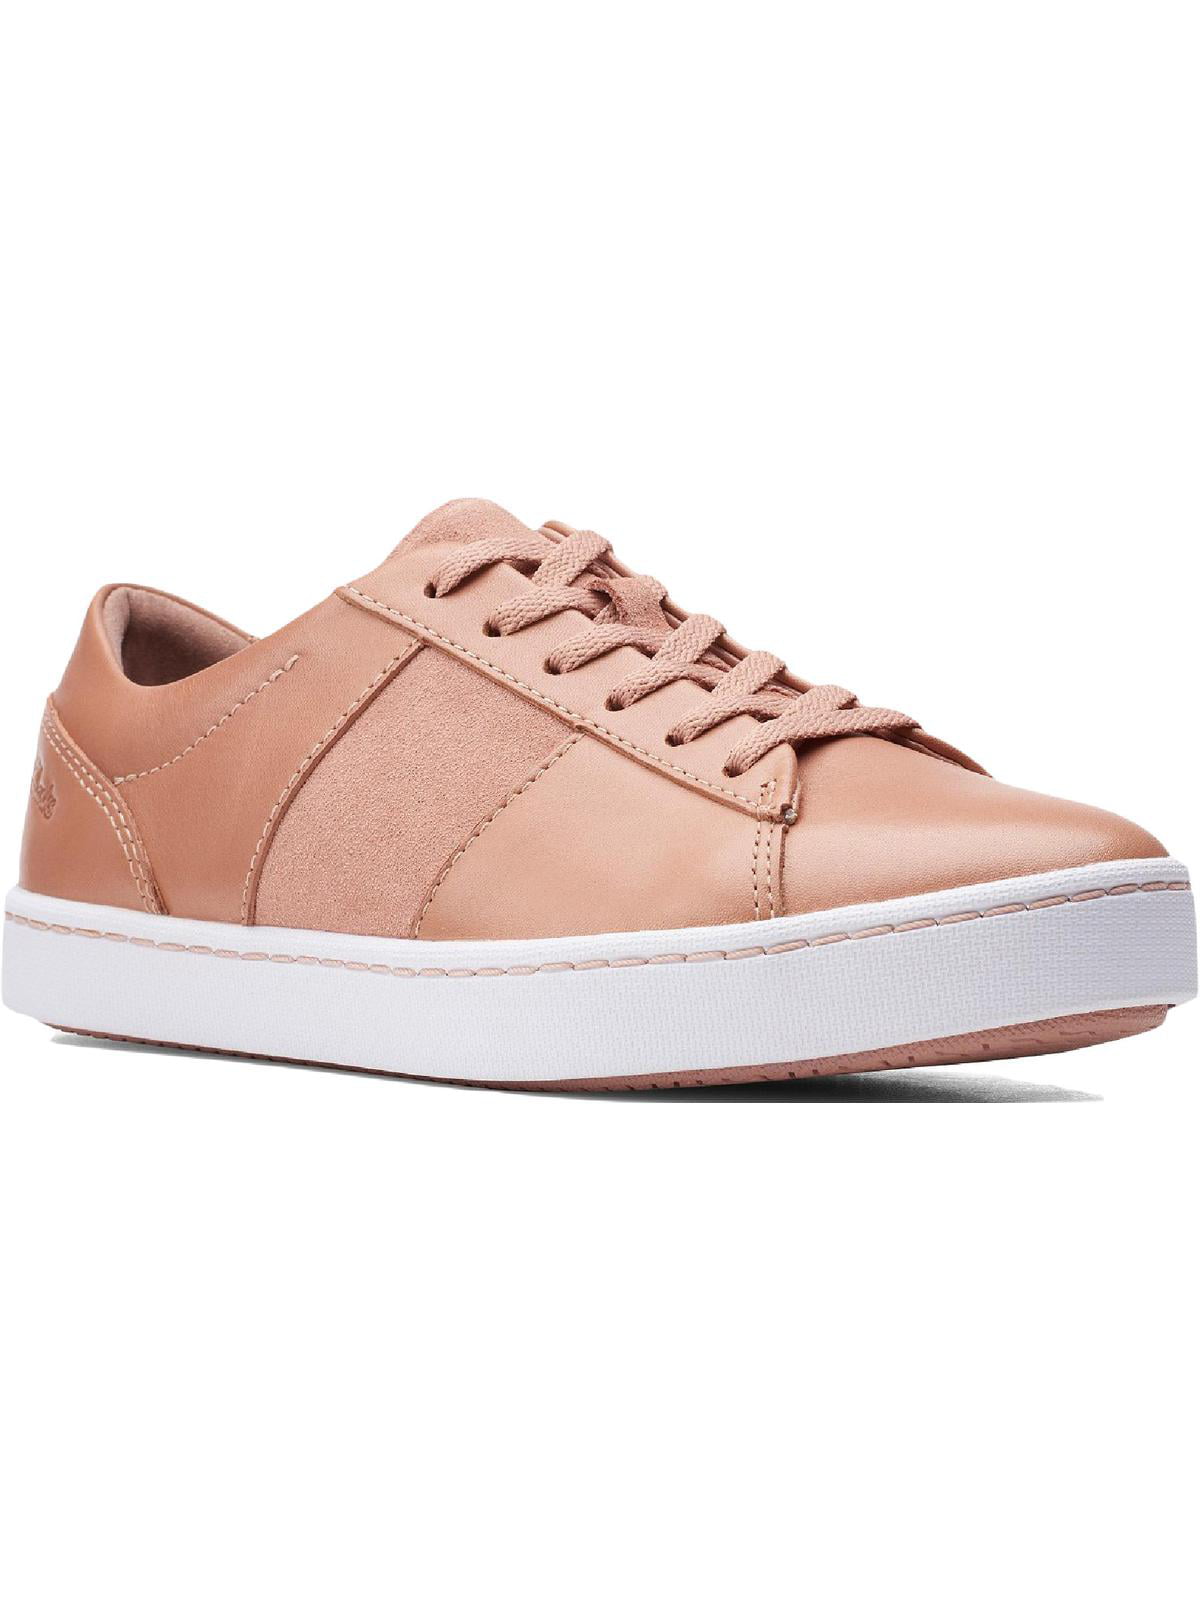 Clarks Womens Pawley Rilee Leather Lace Up Sneakers -